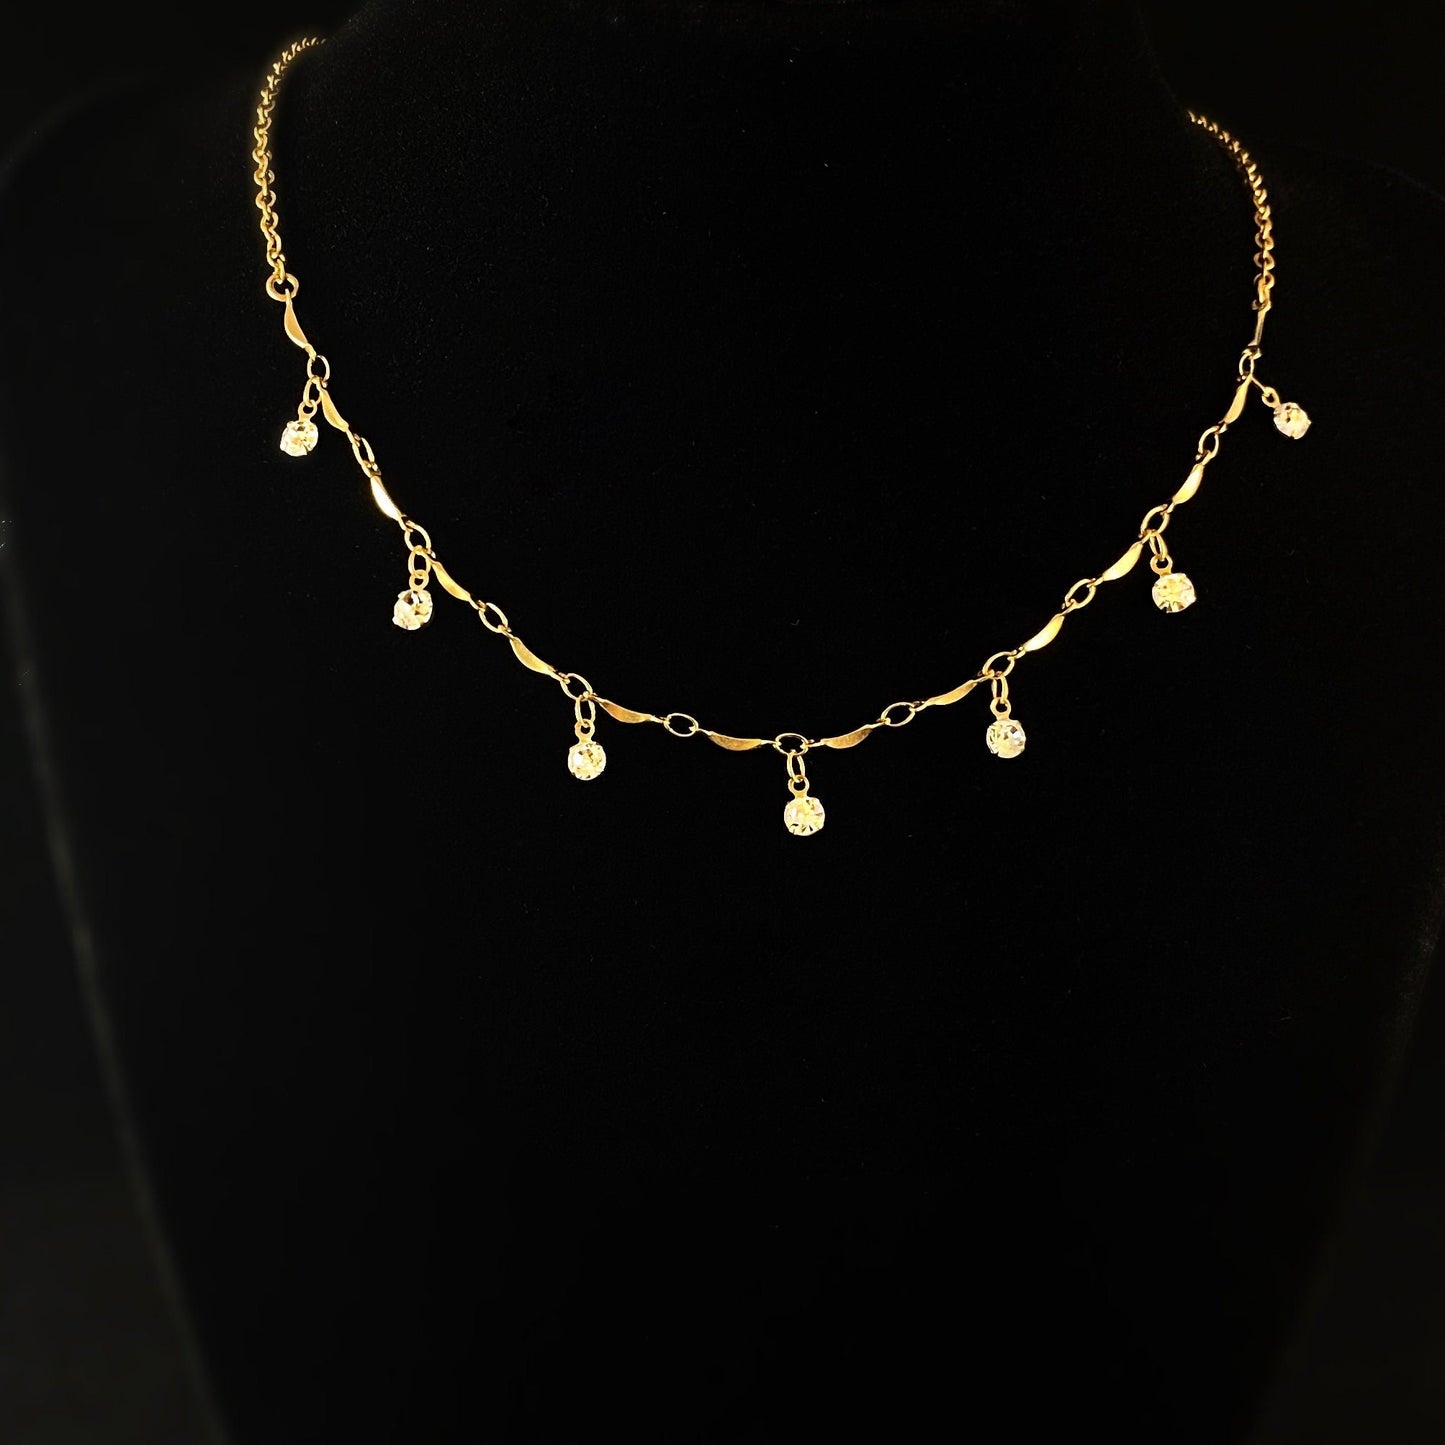 Delicate Gold Chain Necklace with Small Swarovski Crystal Detailing - La Vie Parisienne by Catherine Popesco